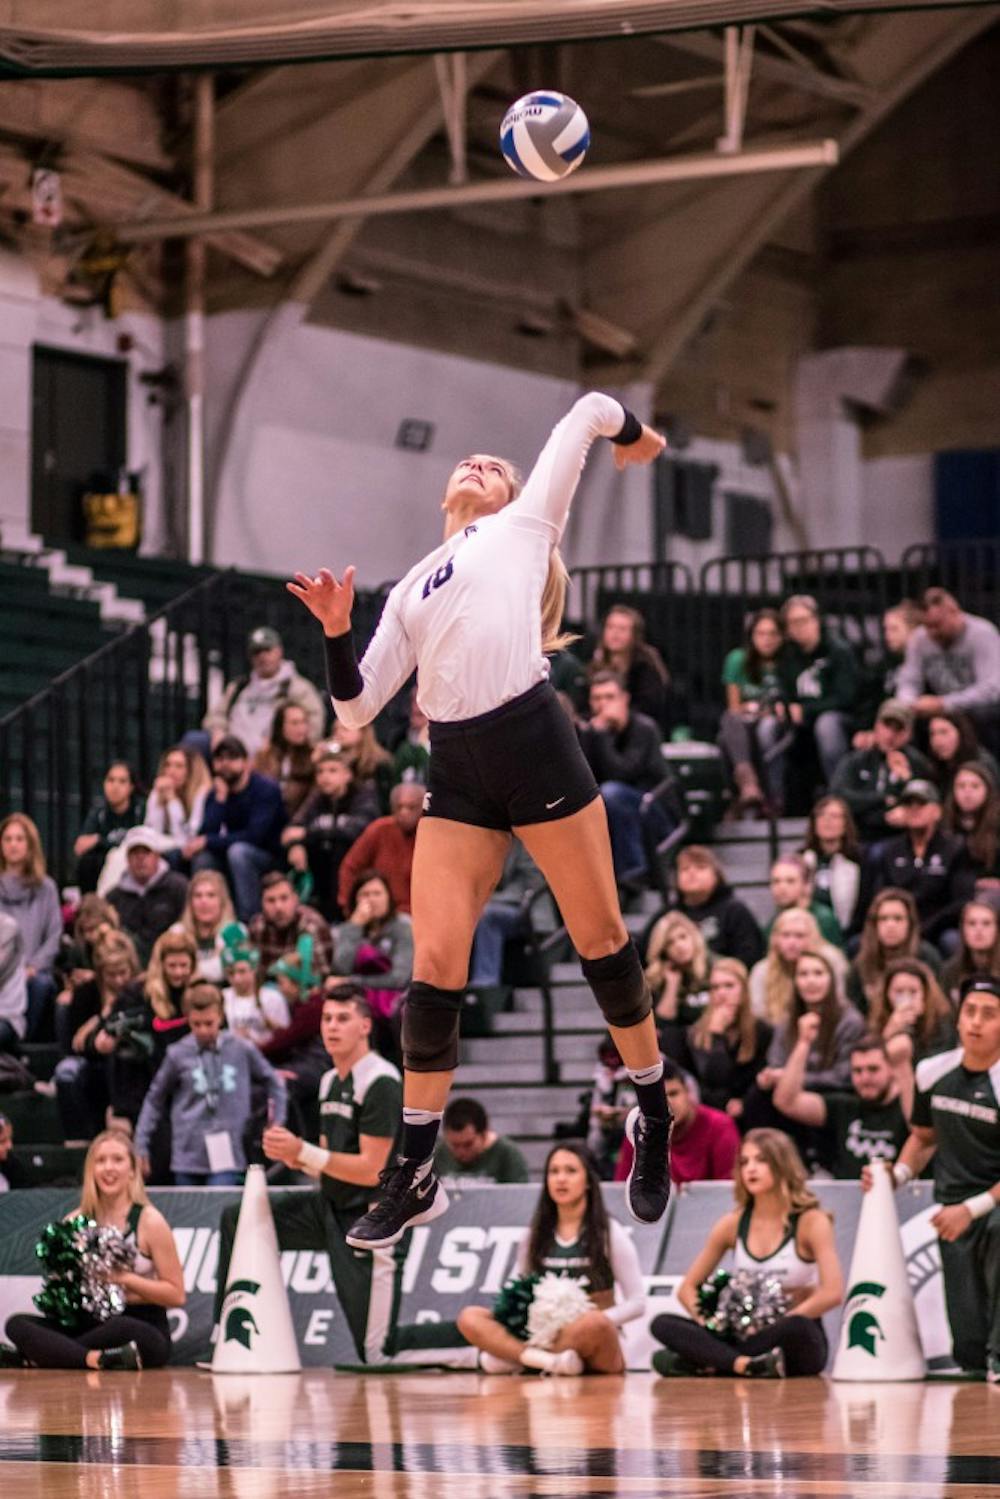 Senior outside hitter Holly Tolliver (18) serves a ball during the game against Indiana on November 18, 2017, at Jenison Fieldhouse. The Spartans defeated the Hoosiers, 3-0.